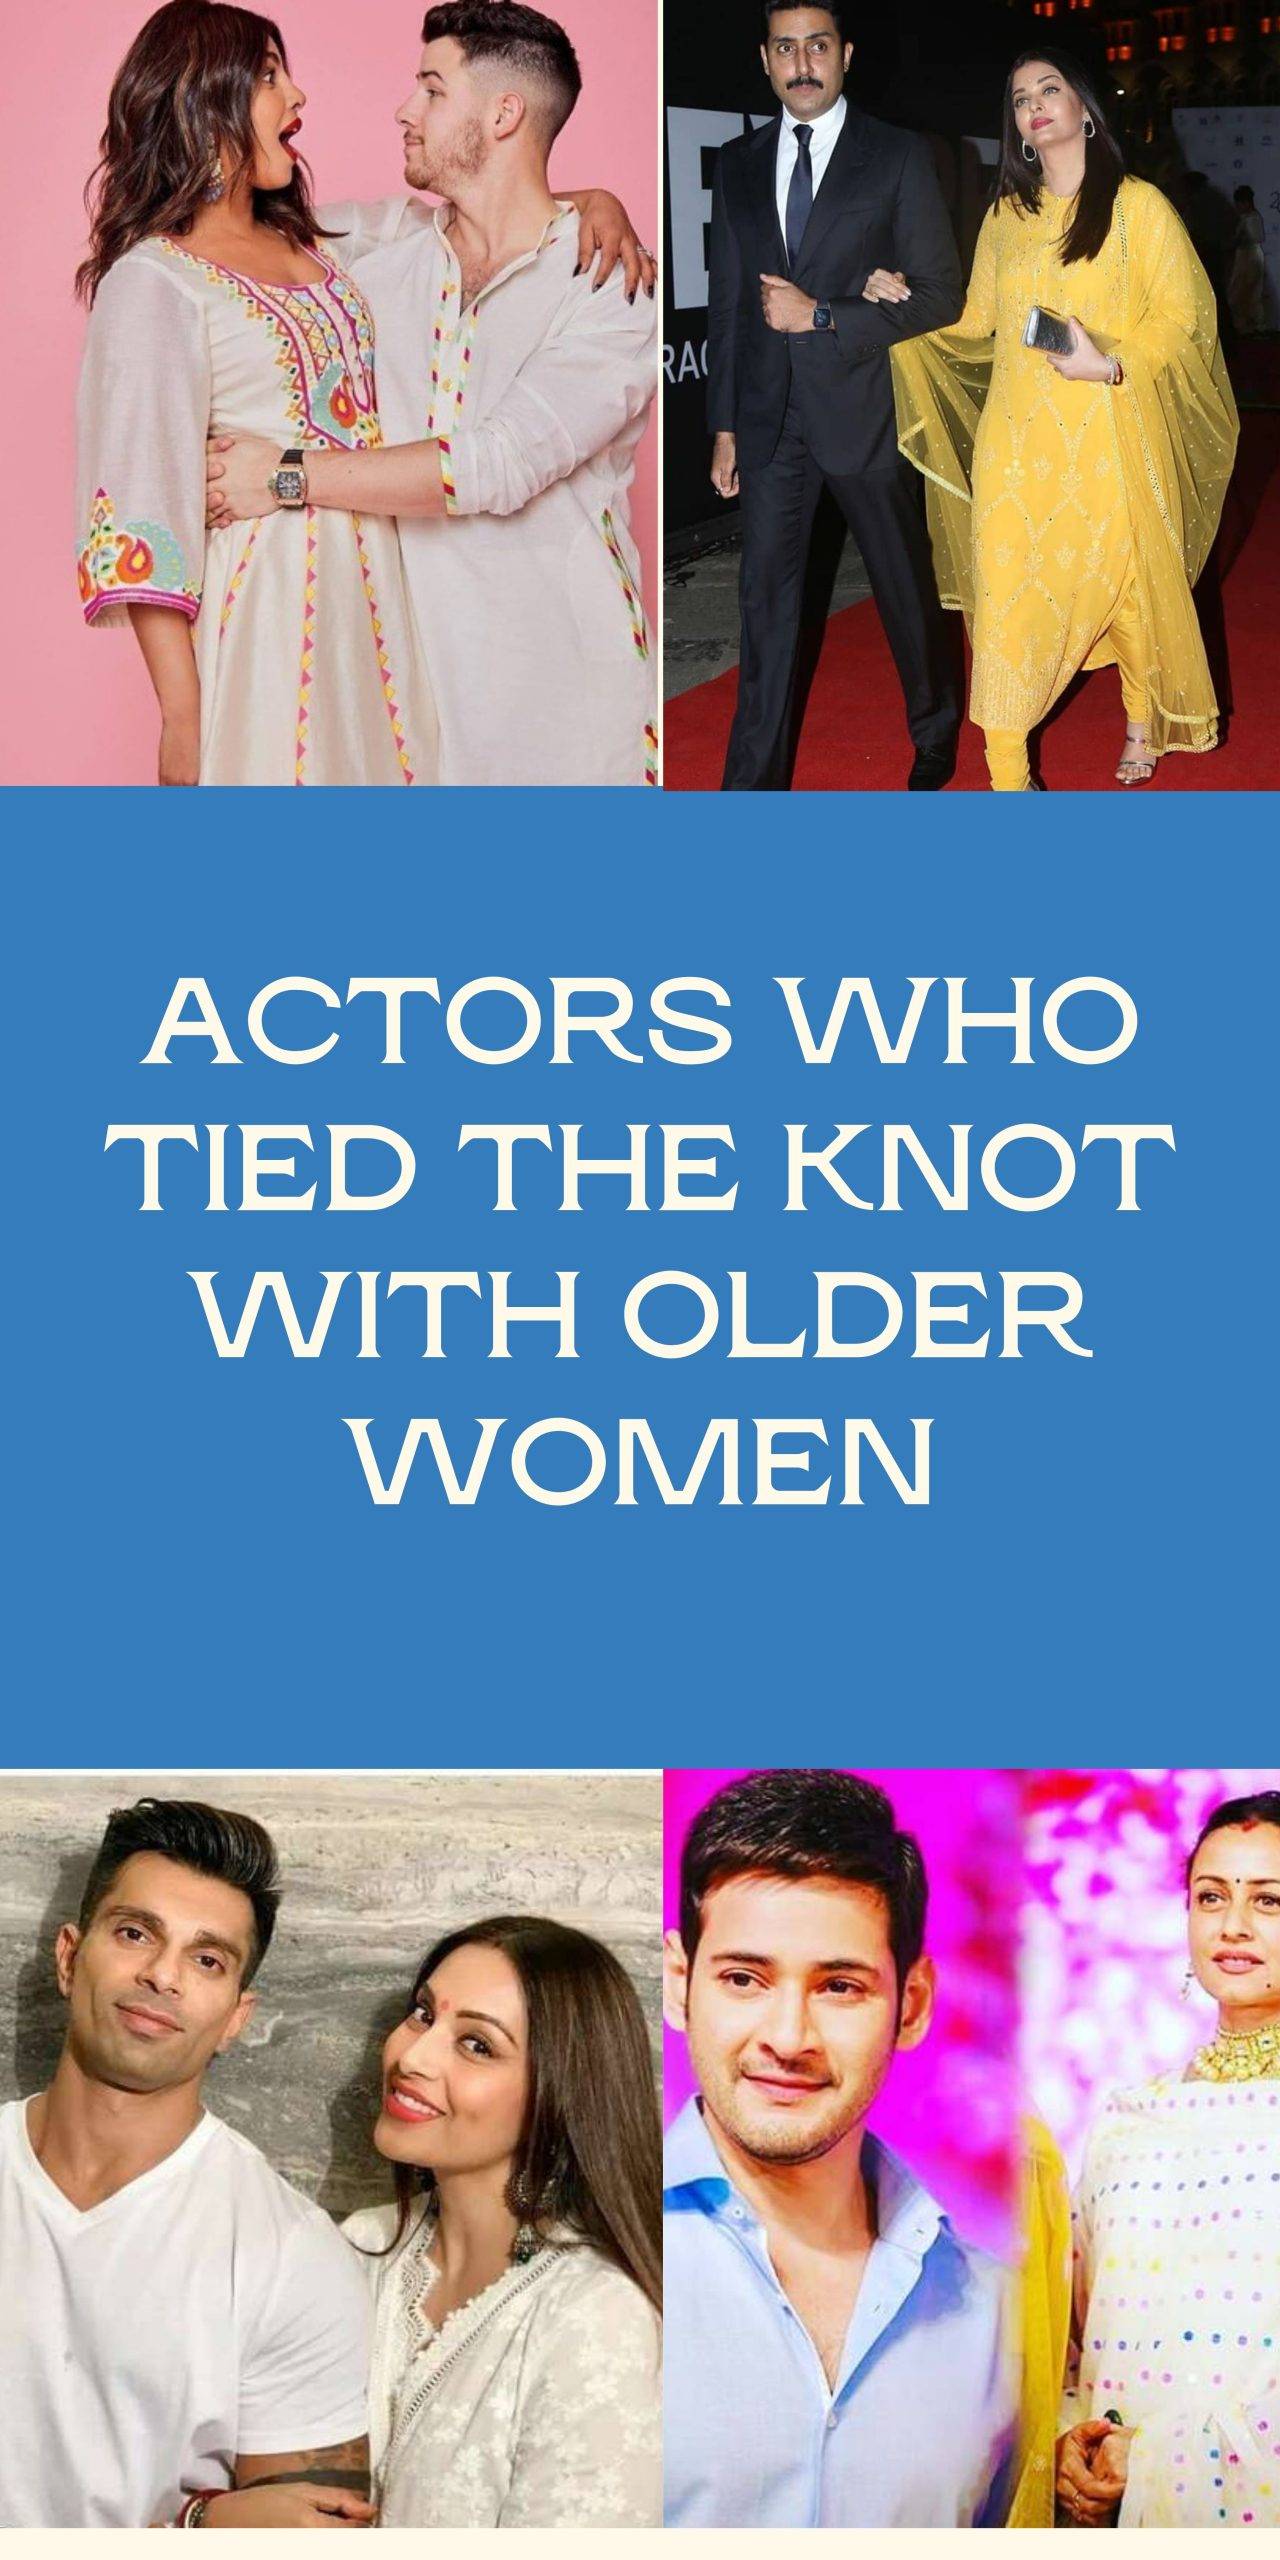 Actors Who Tied the Knot With Older Women